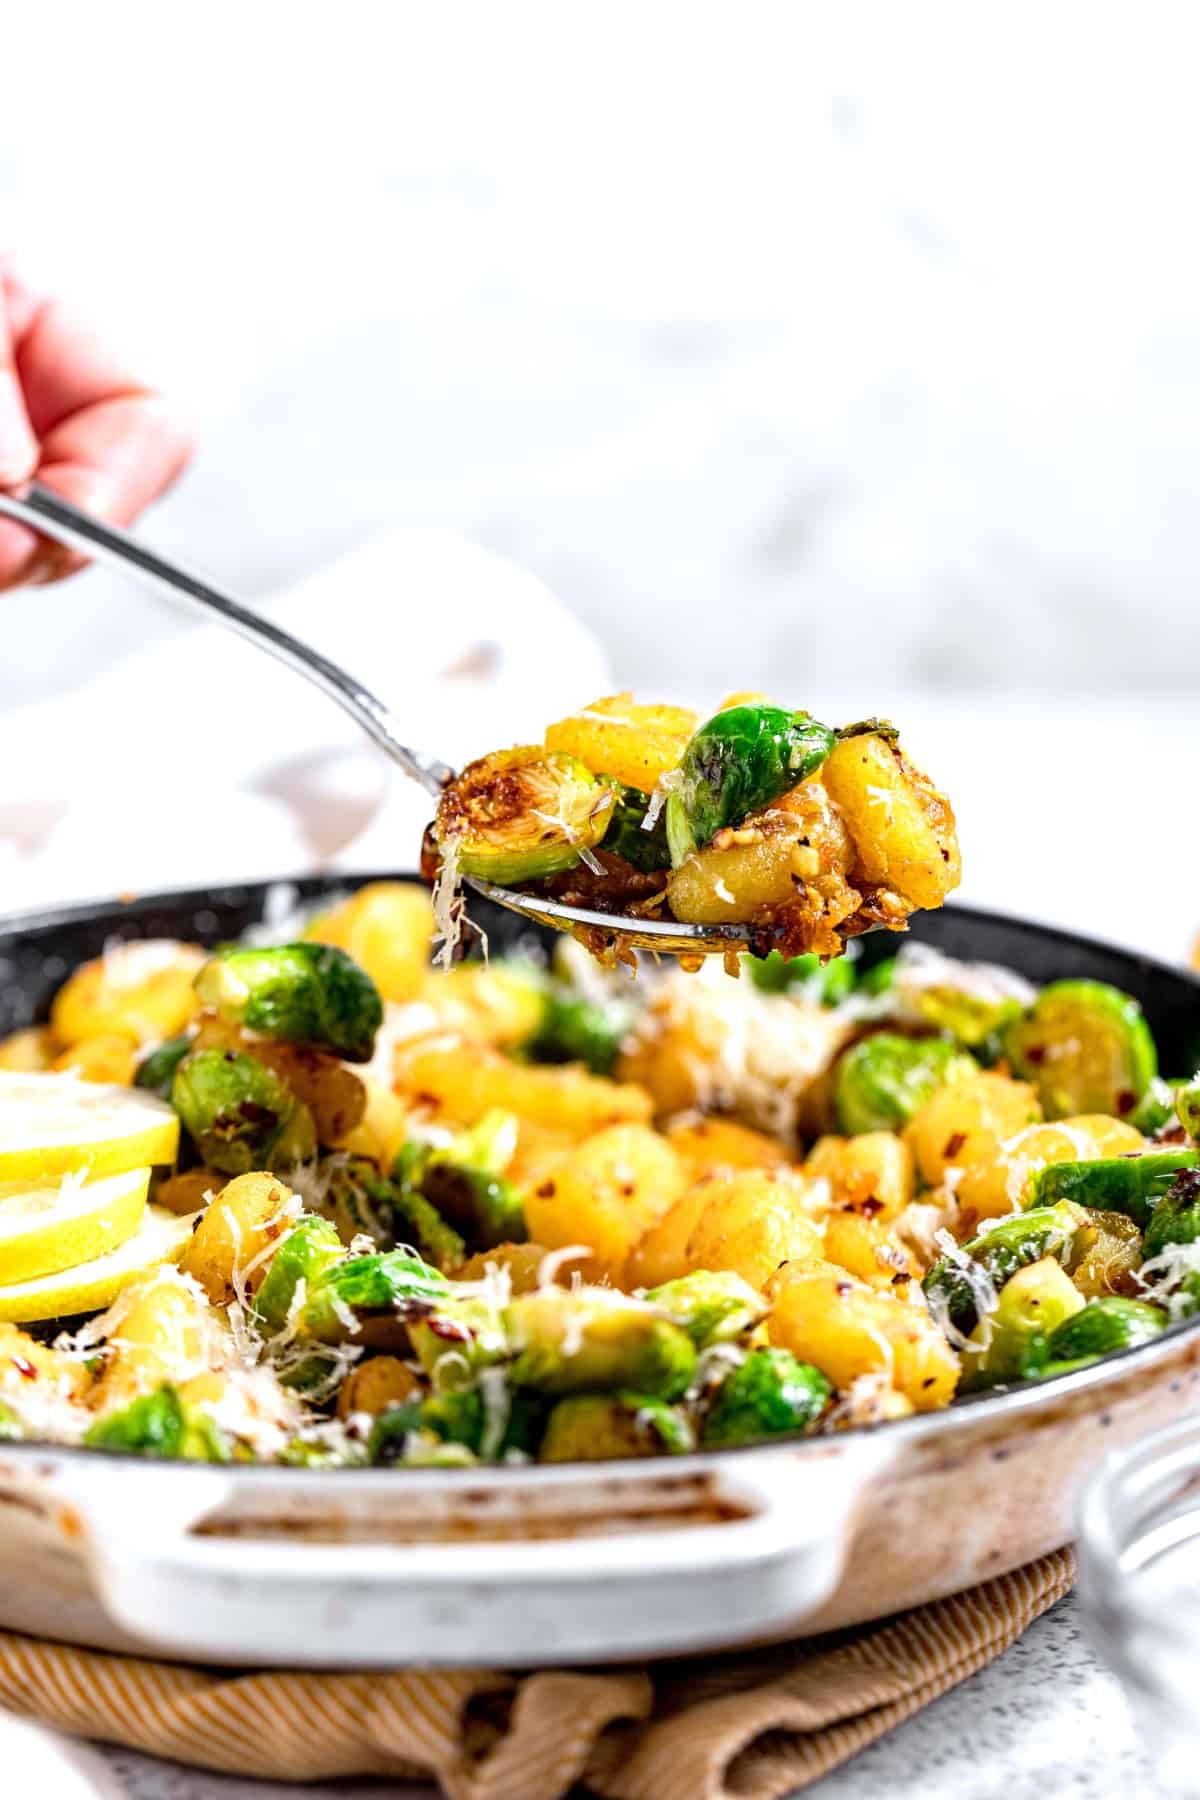 A woman using a large spoon to scoop up some skillet gnocchi and brussels sprouts.